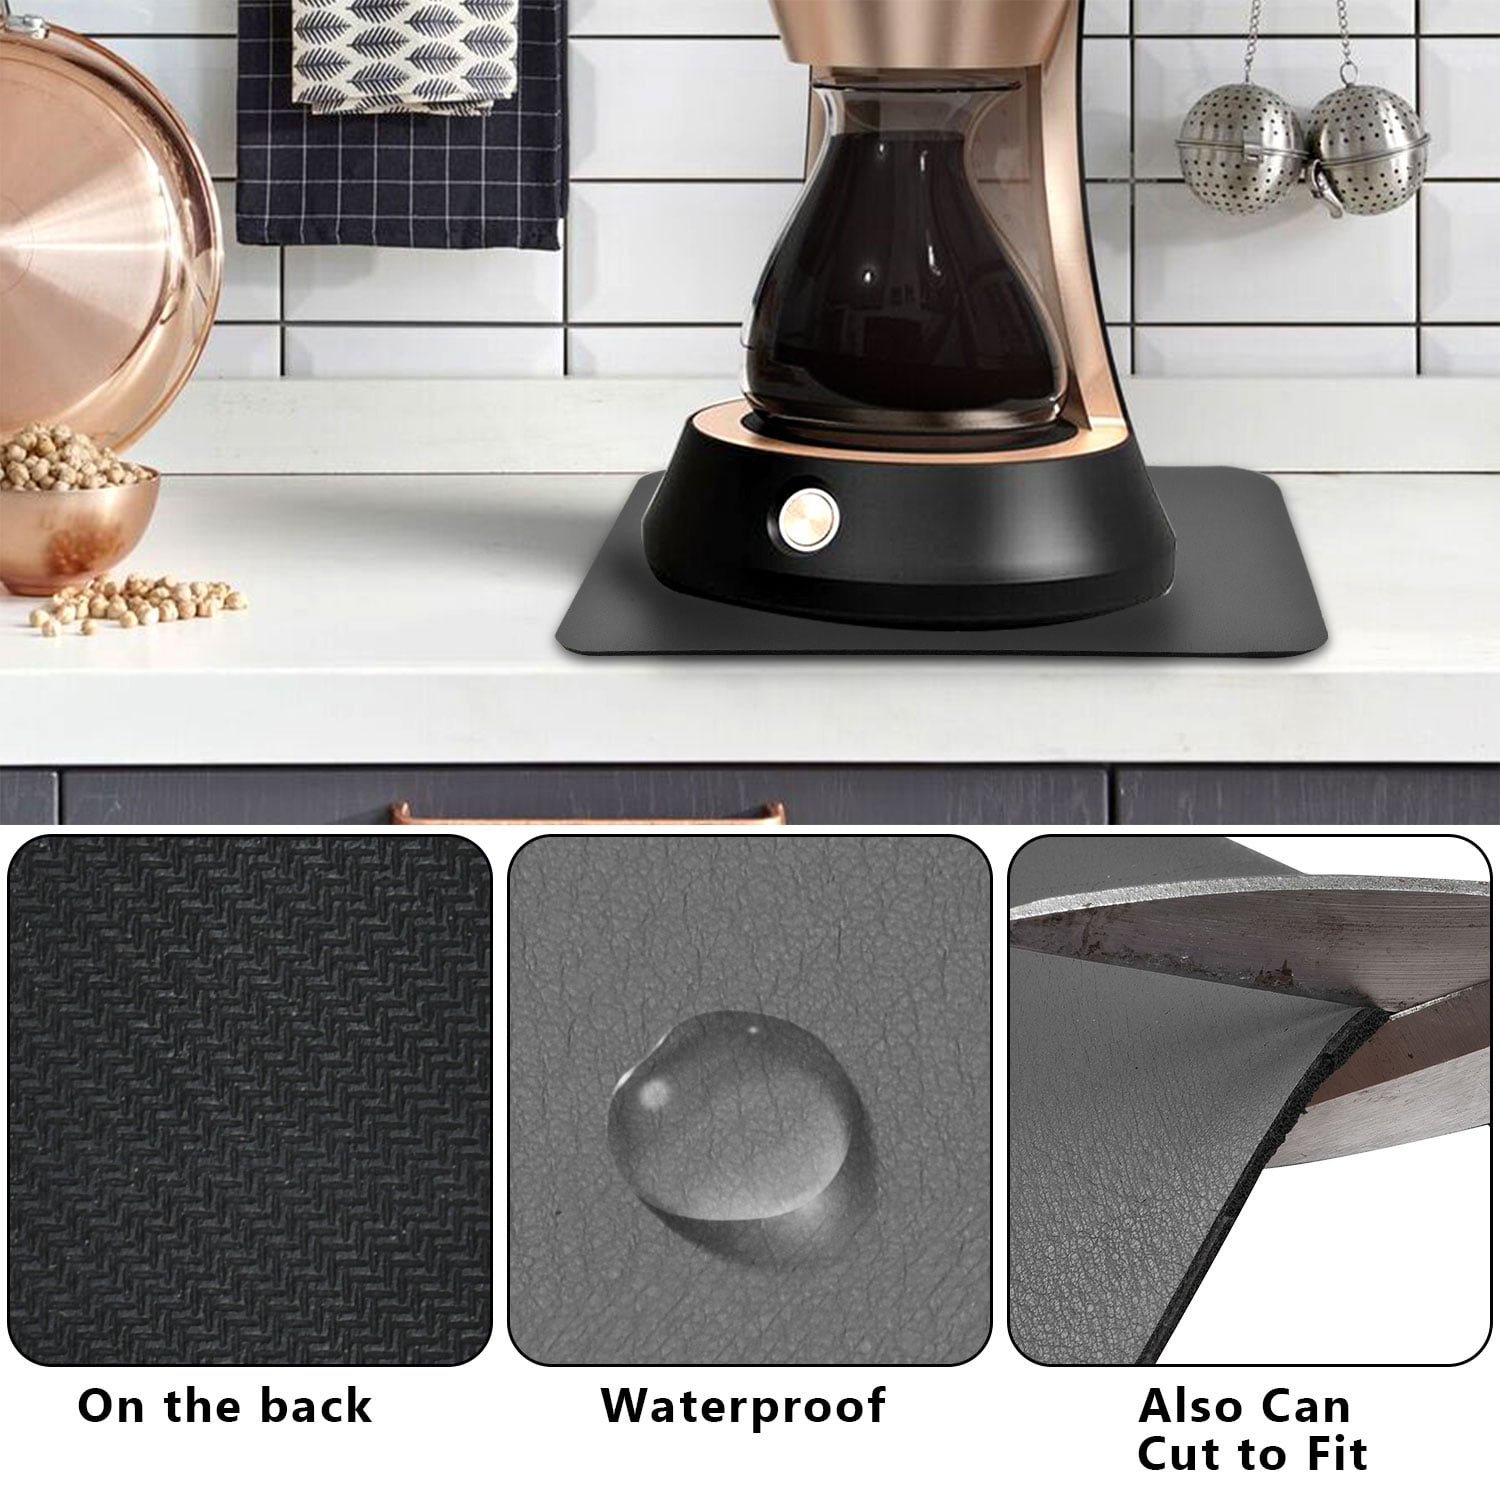 AMOAMI-Coffee Mat Hide Stain Rubber Backed Absorbent Dish Drying